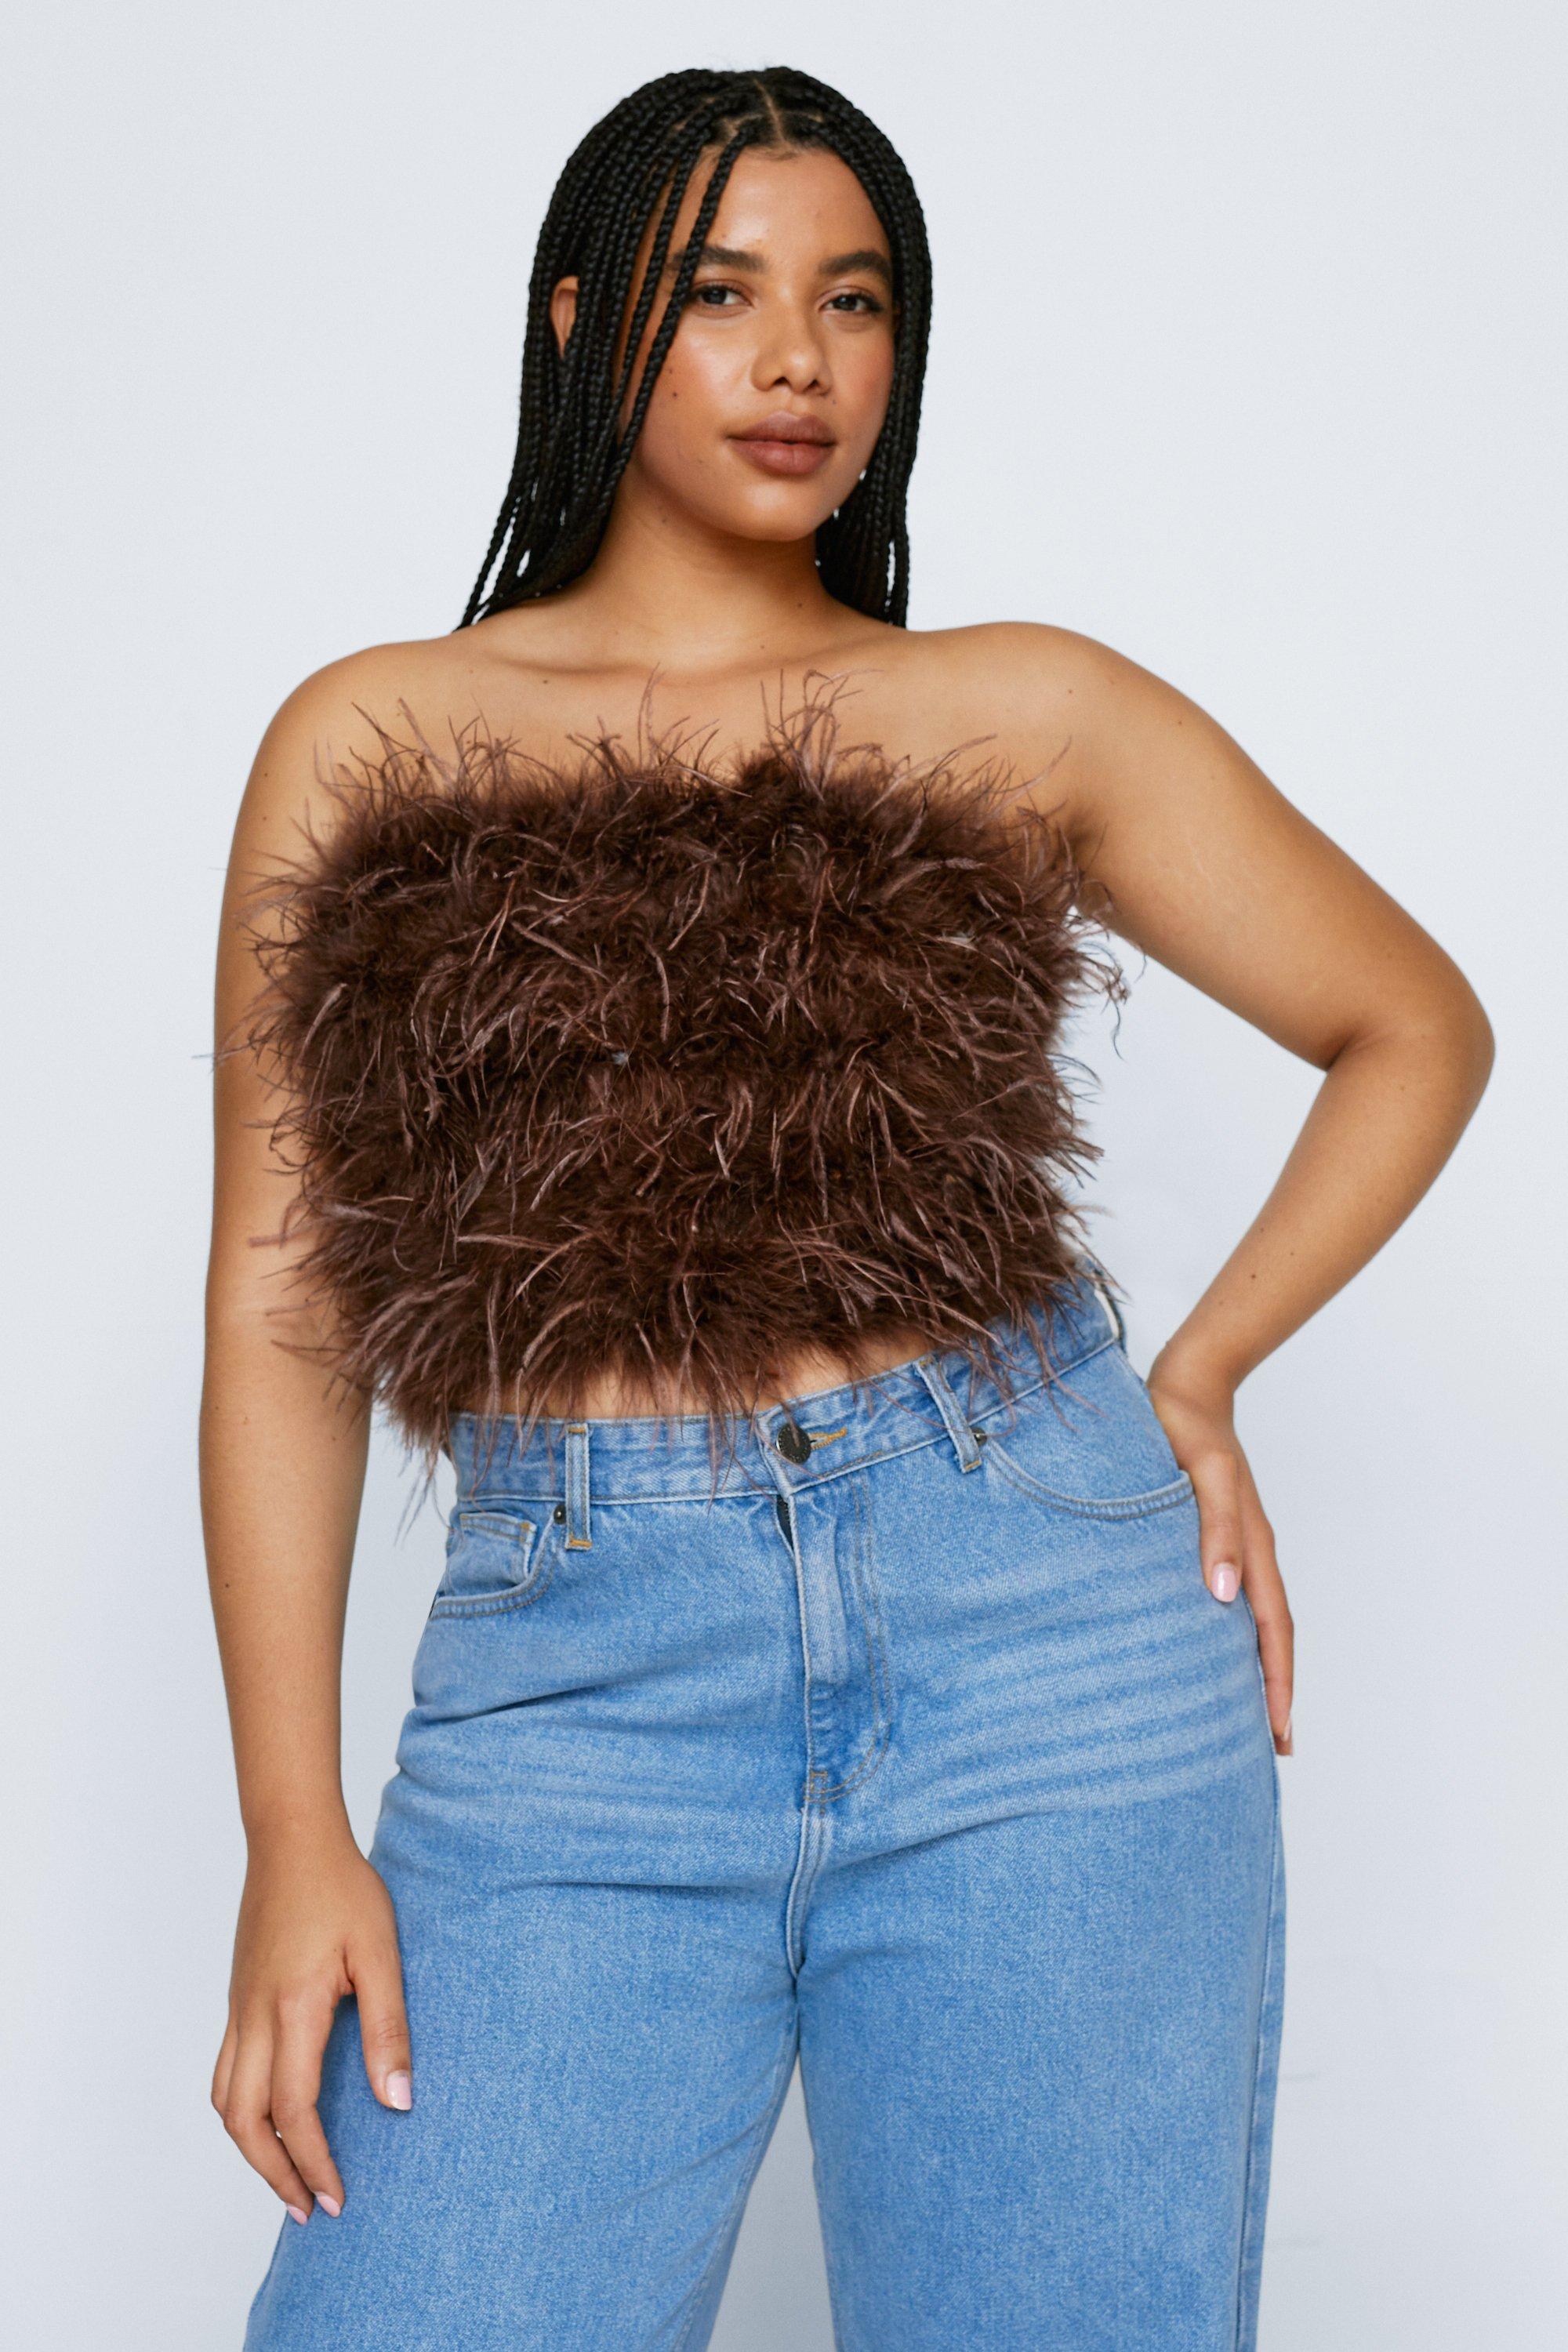 Plus-Size Bustier Tops Shopping Guide, Corset Tops to Shop